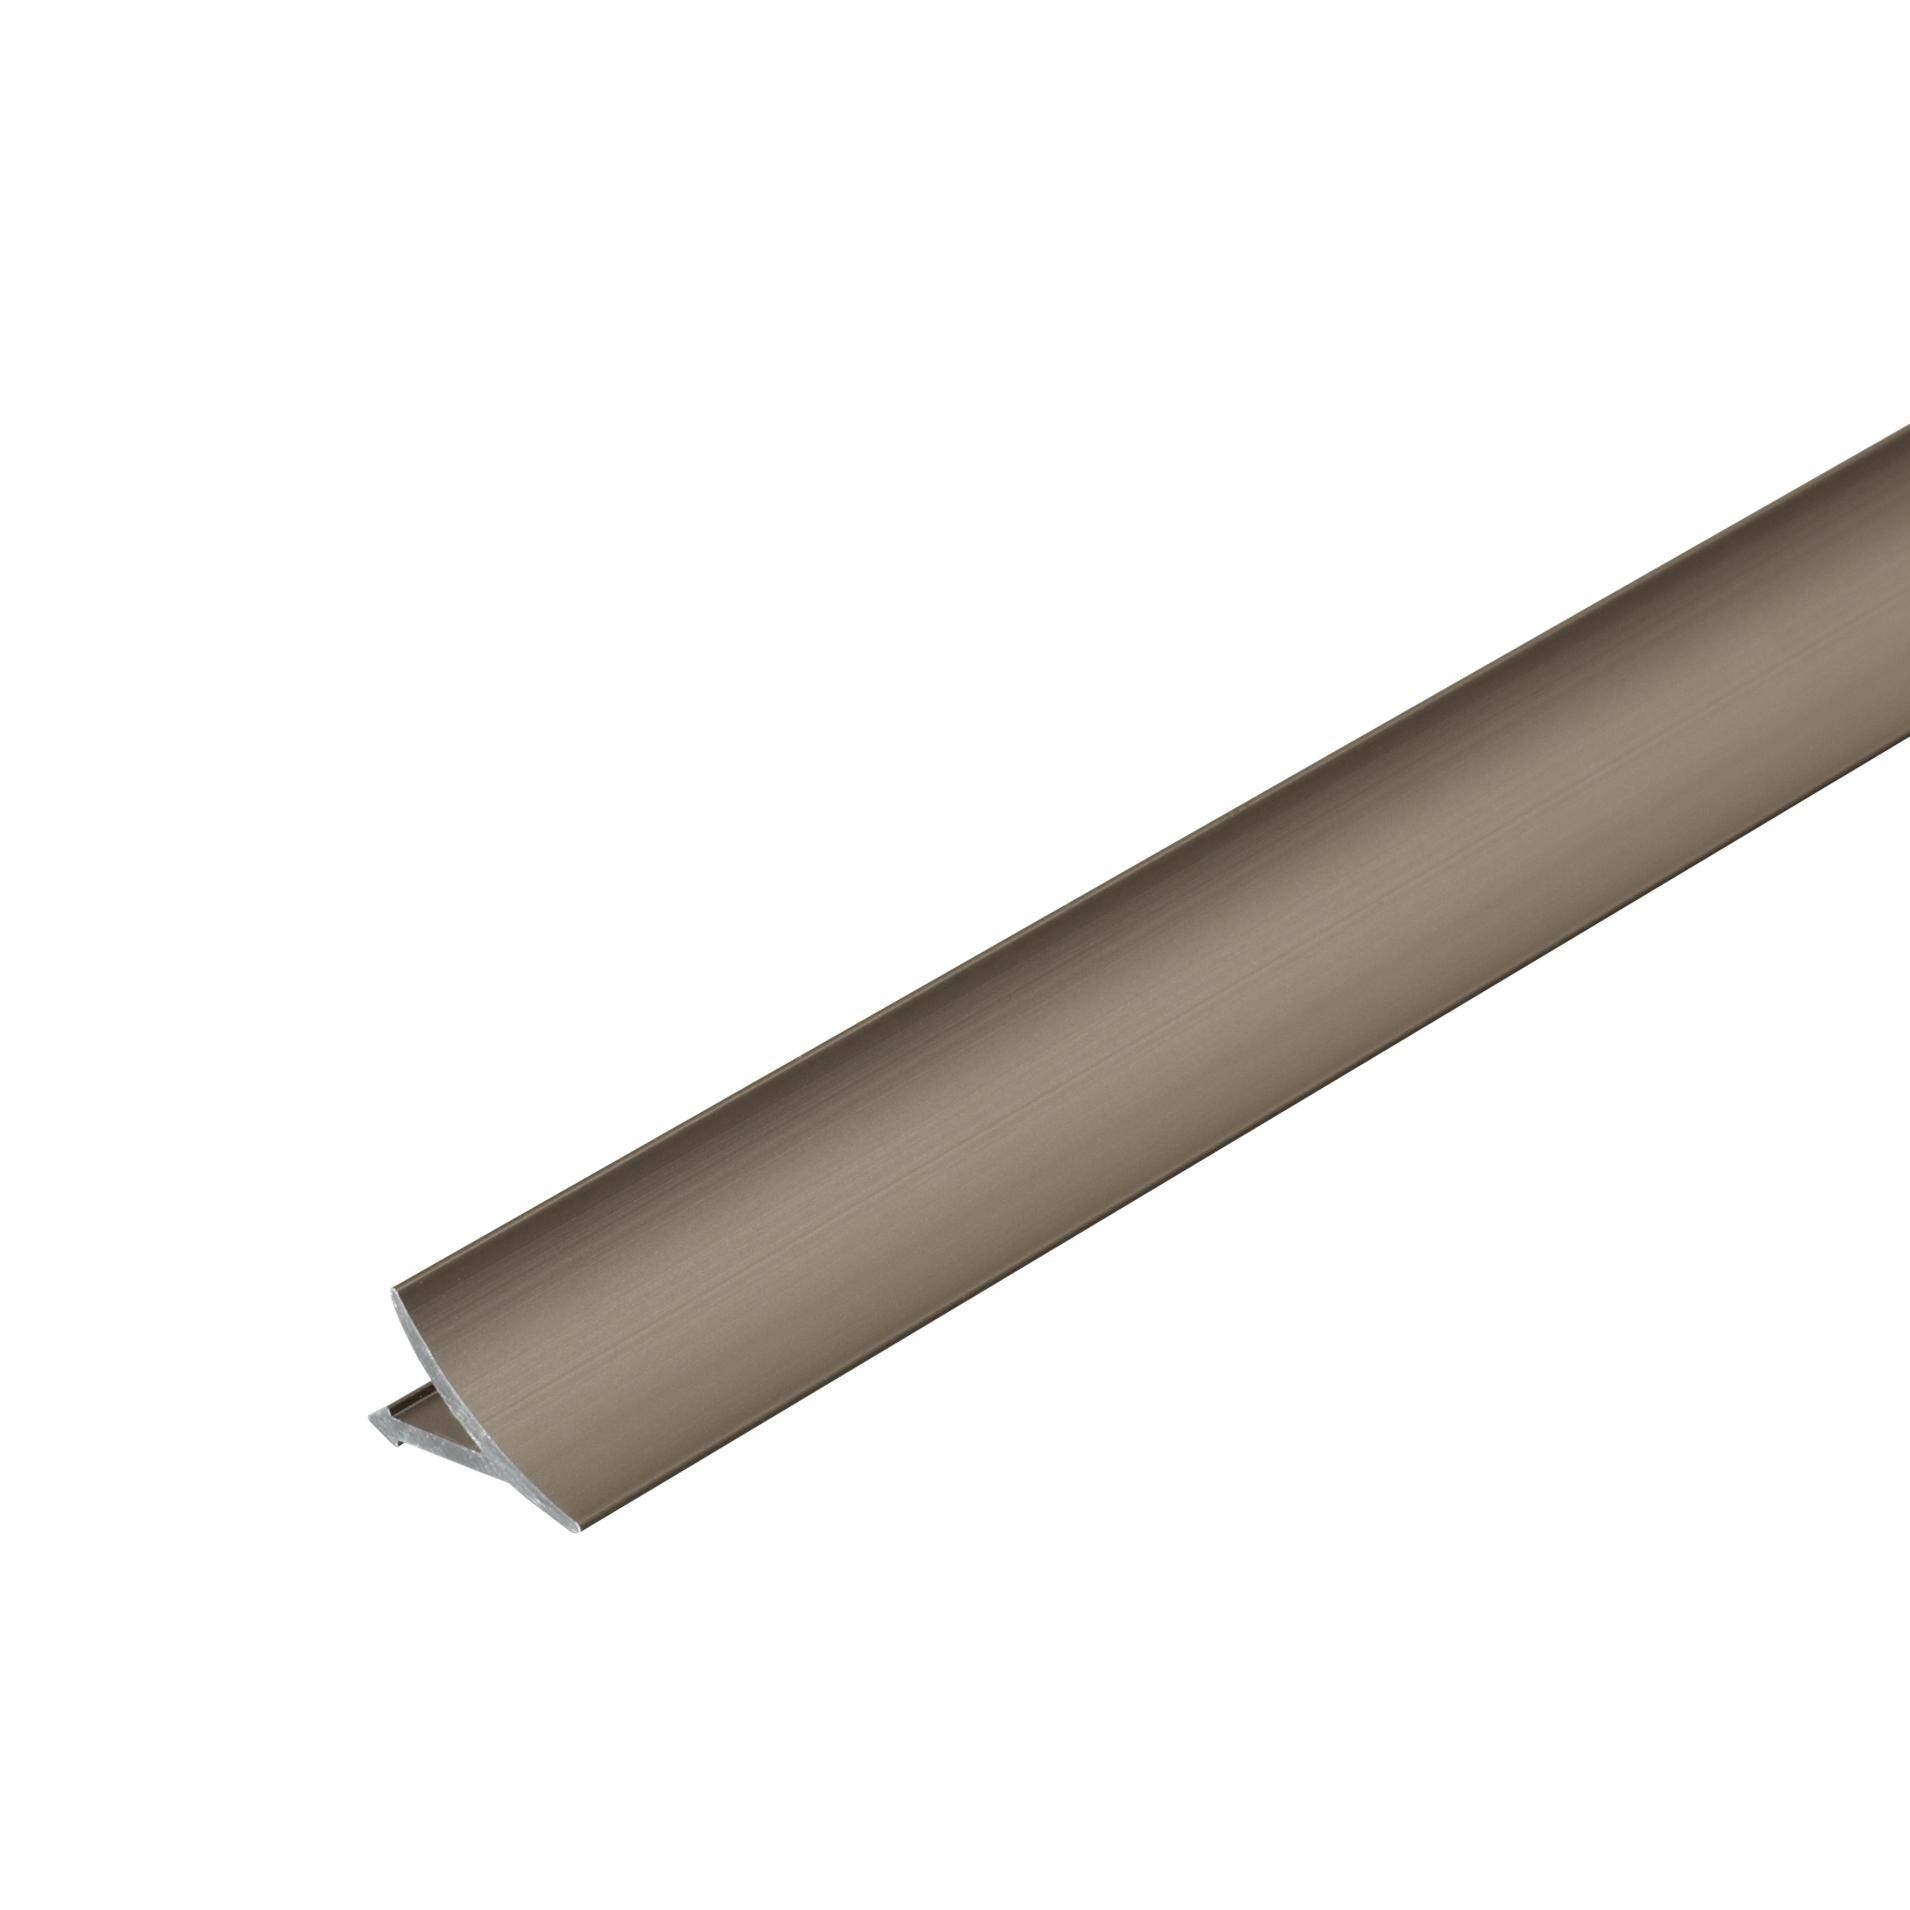 T-COVE Connection Trim 5/8 in. Aluminum - Bronze- Anodized Brushed - Tile Edge Trim by Dural